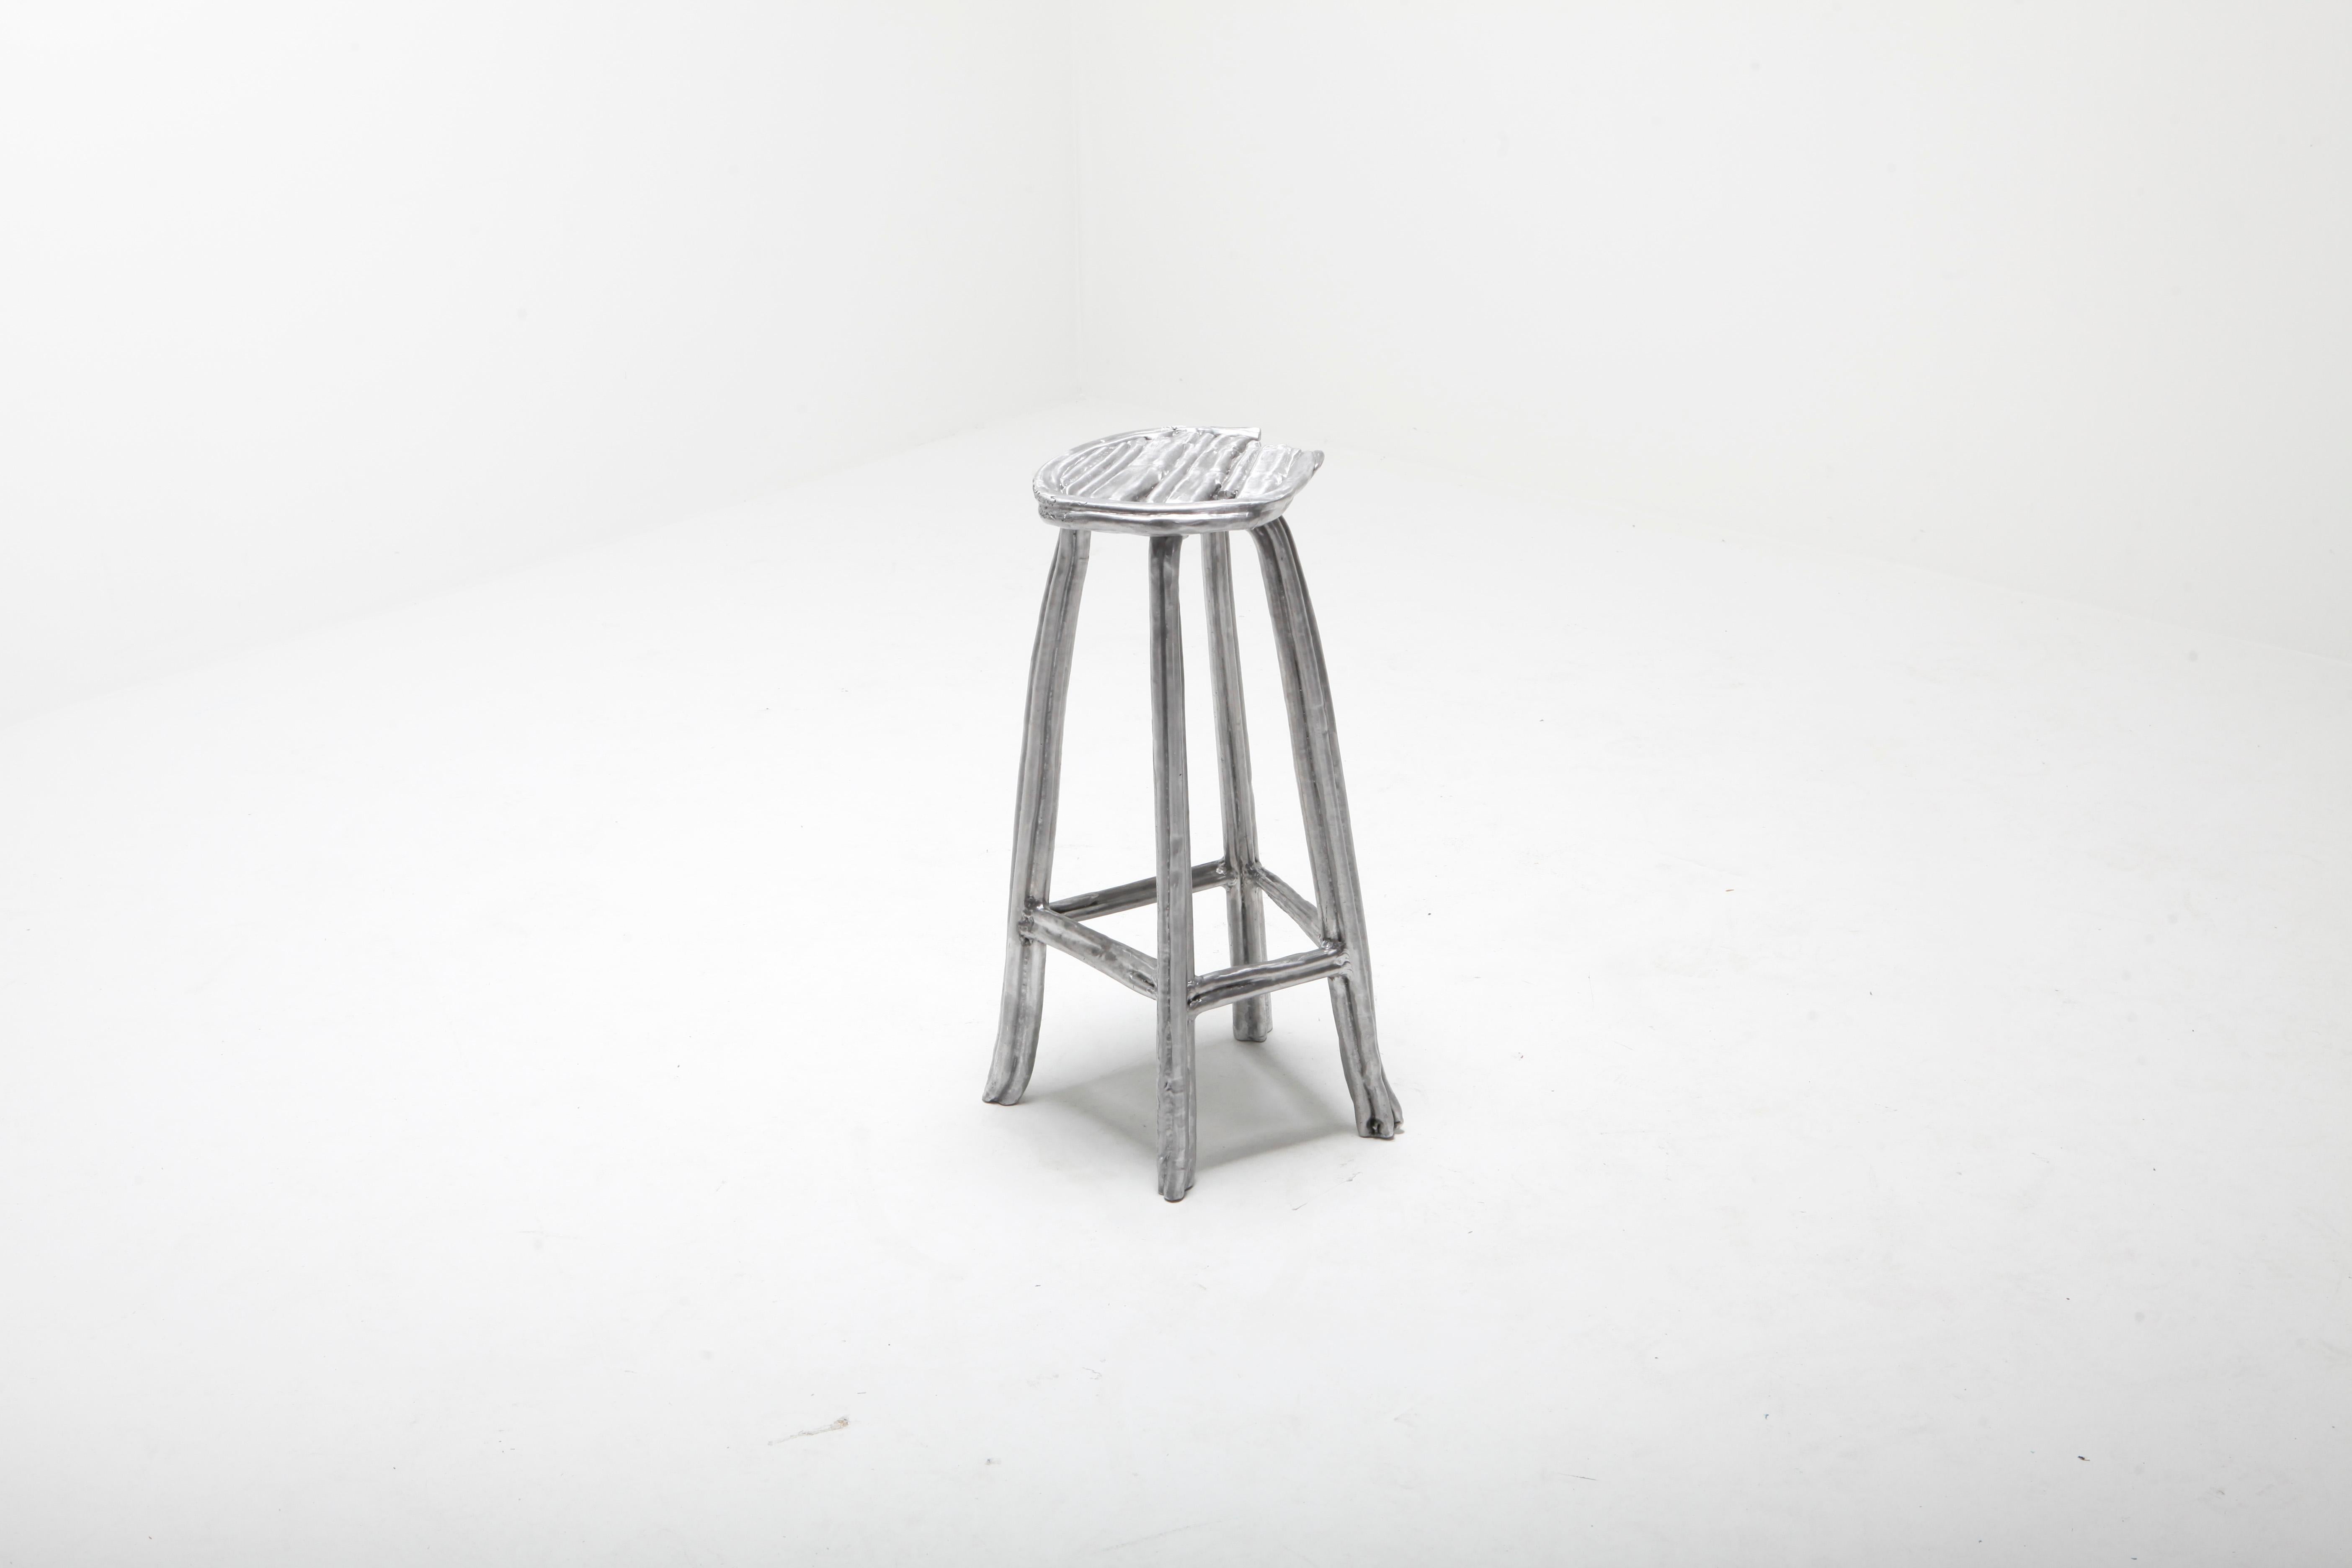 Unique bar stool T-008 -by Studio Nicolas Erauw
Piece unique 1 of 1
Dimensions: H 70 CM x Ø 35 CM
Materials: Aluminum, wax dipped
13 kg

Part of the on-going ‘Wax on/Wax off series’. These series are a collection of experiments of lost-wax